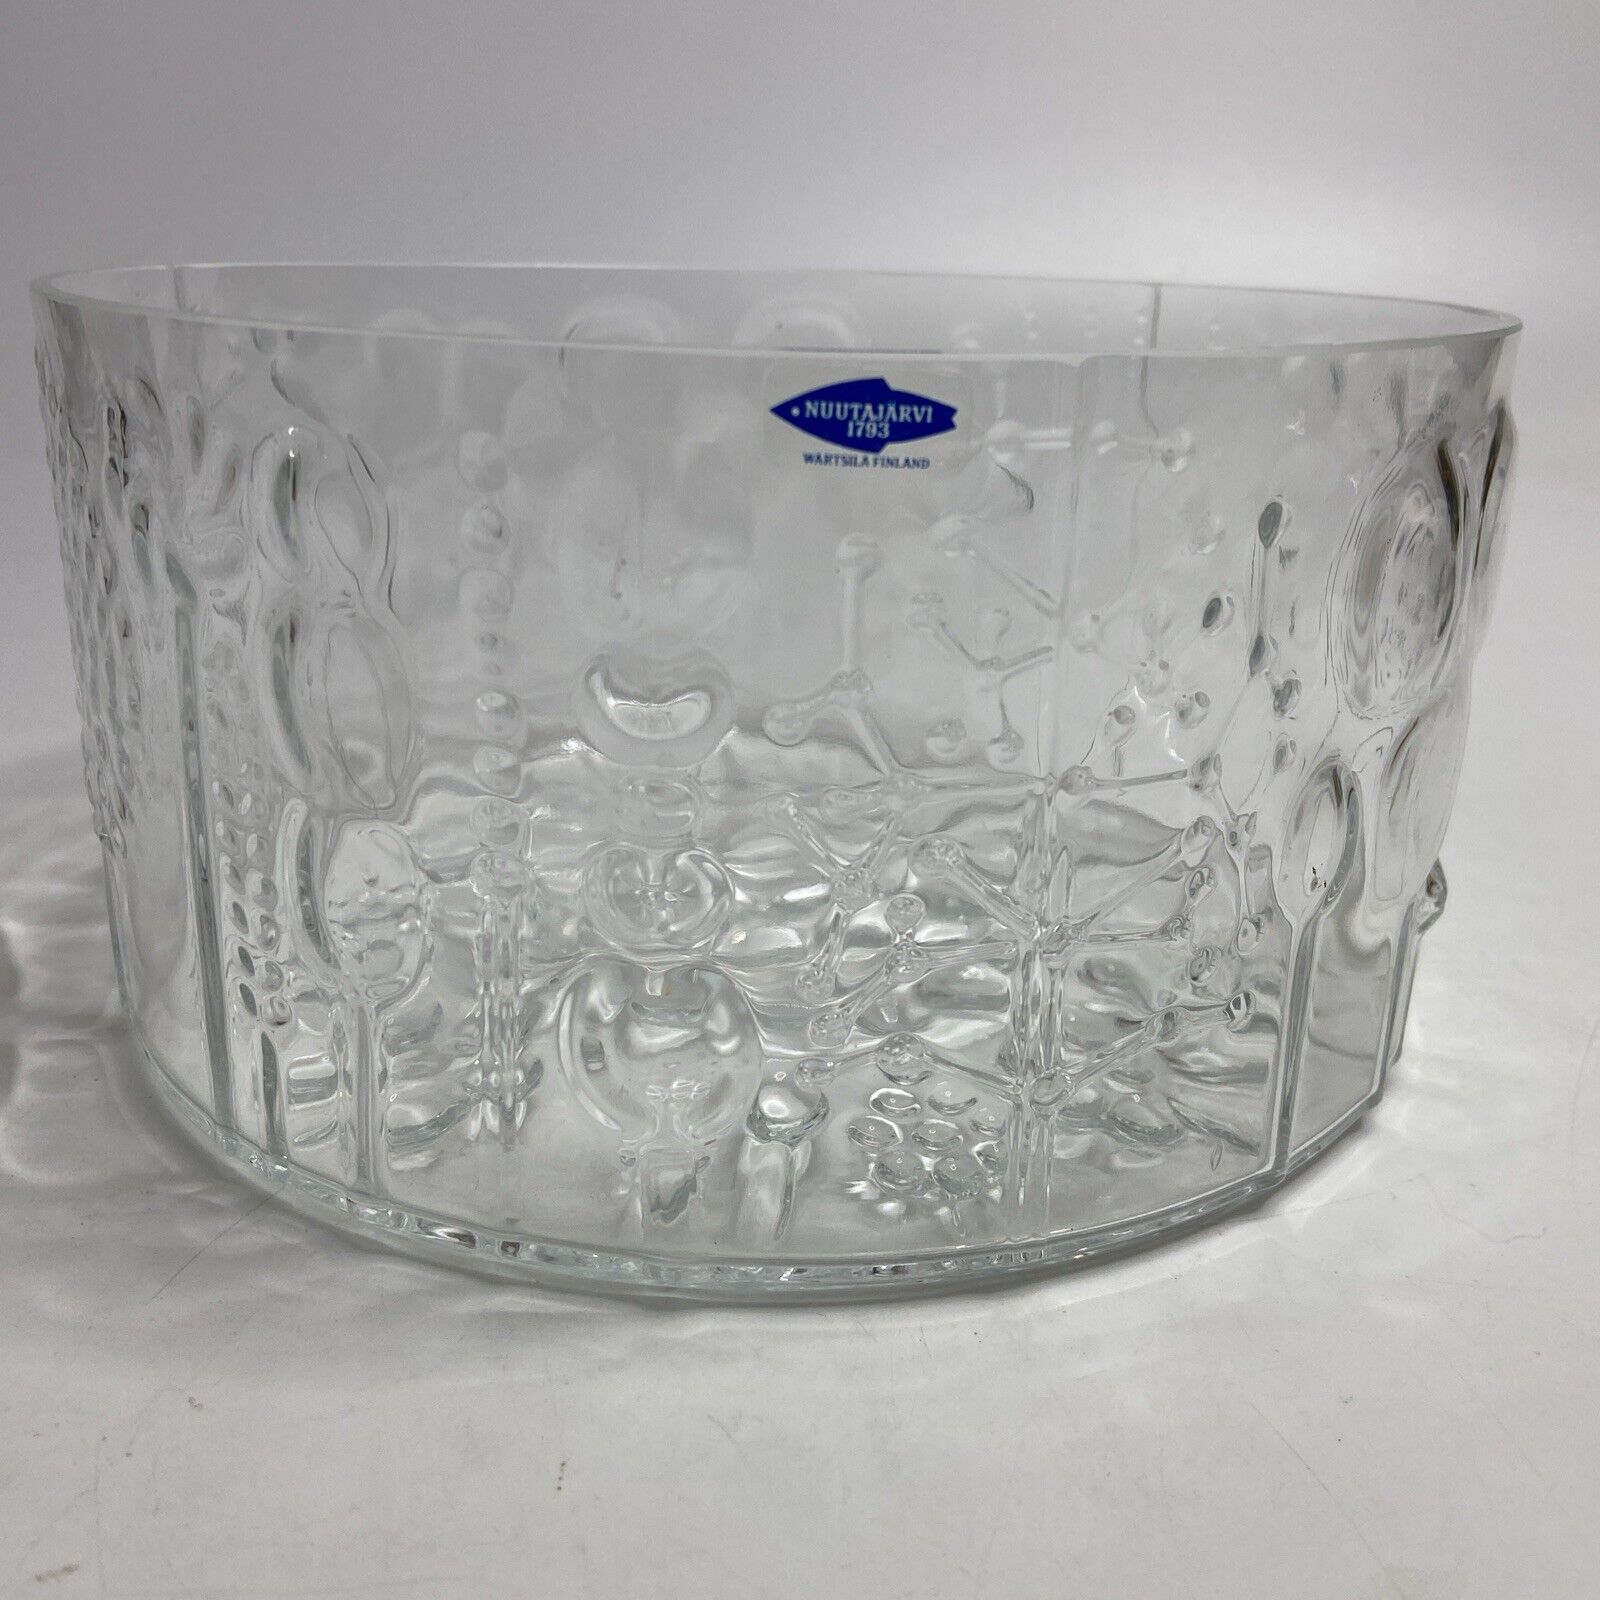 NUUTAJARVI Flora Glass Fruit Bowl by Oiva Toikka for Iittala Finland 7.5 x 4 in